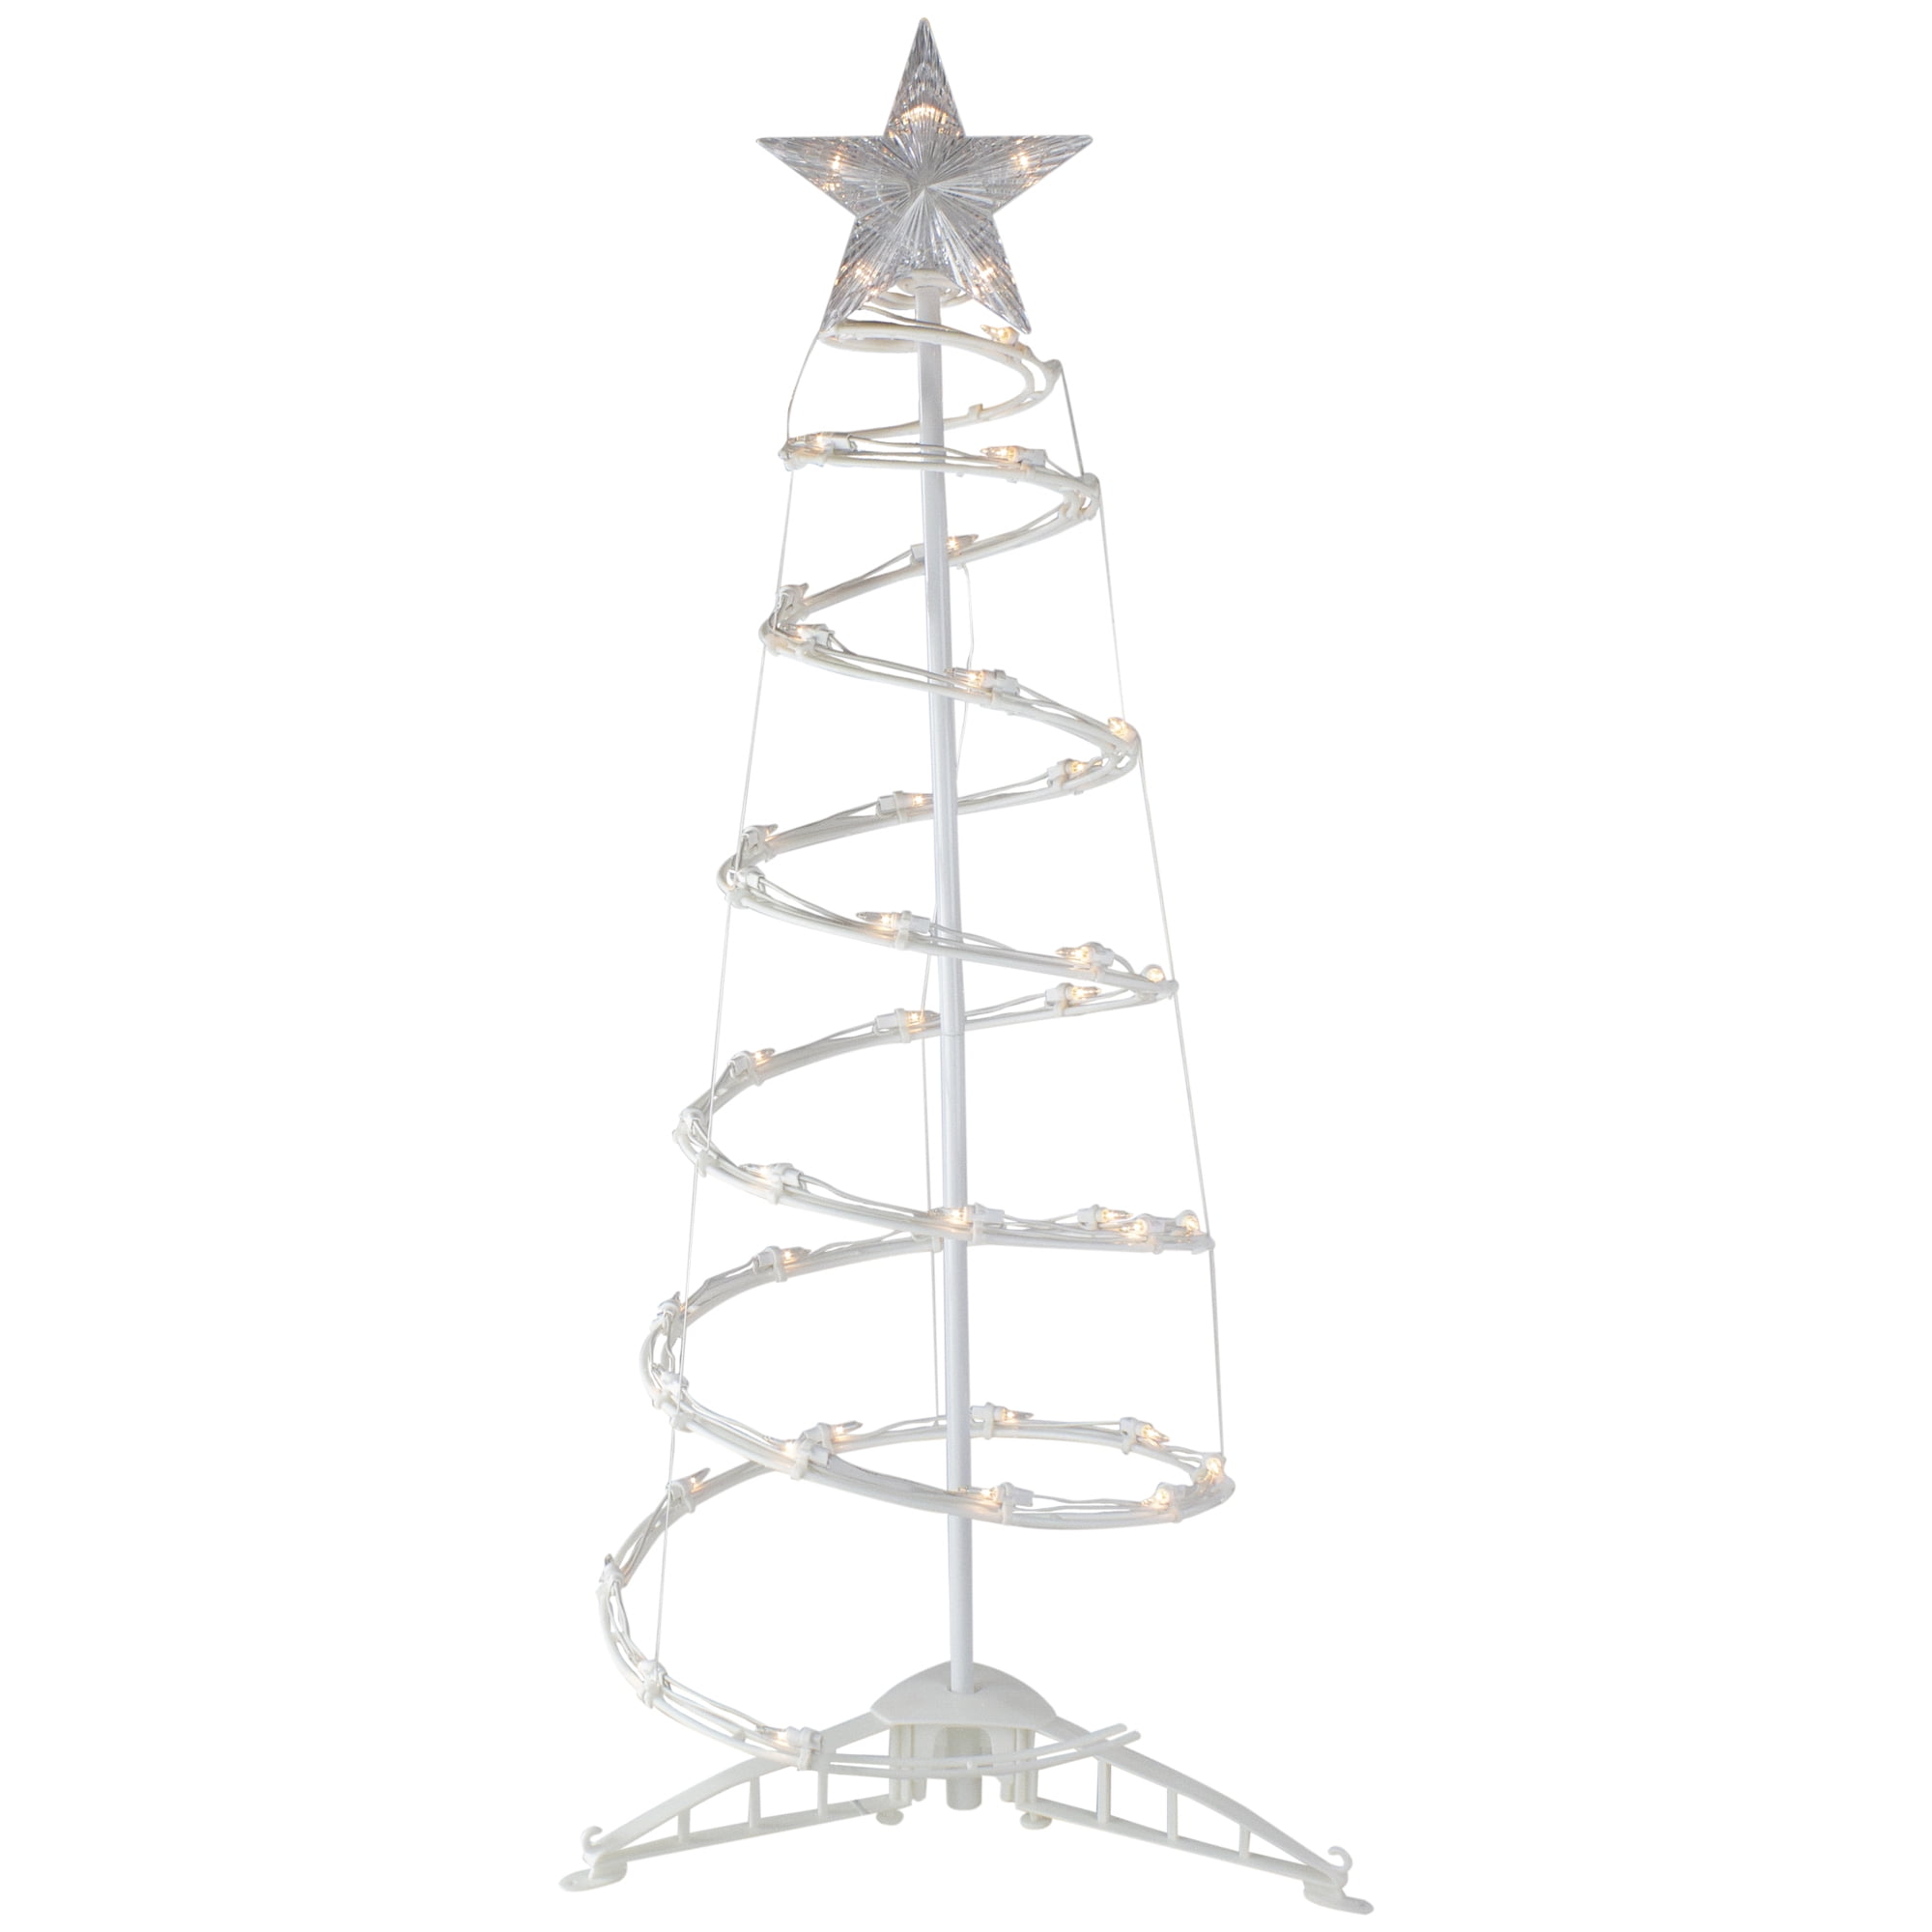 Set of 2 Pre-Lit Spiral Christmas Trees with Star Tree Topper 4 and 6ft 